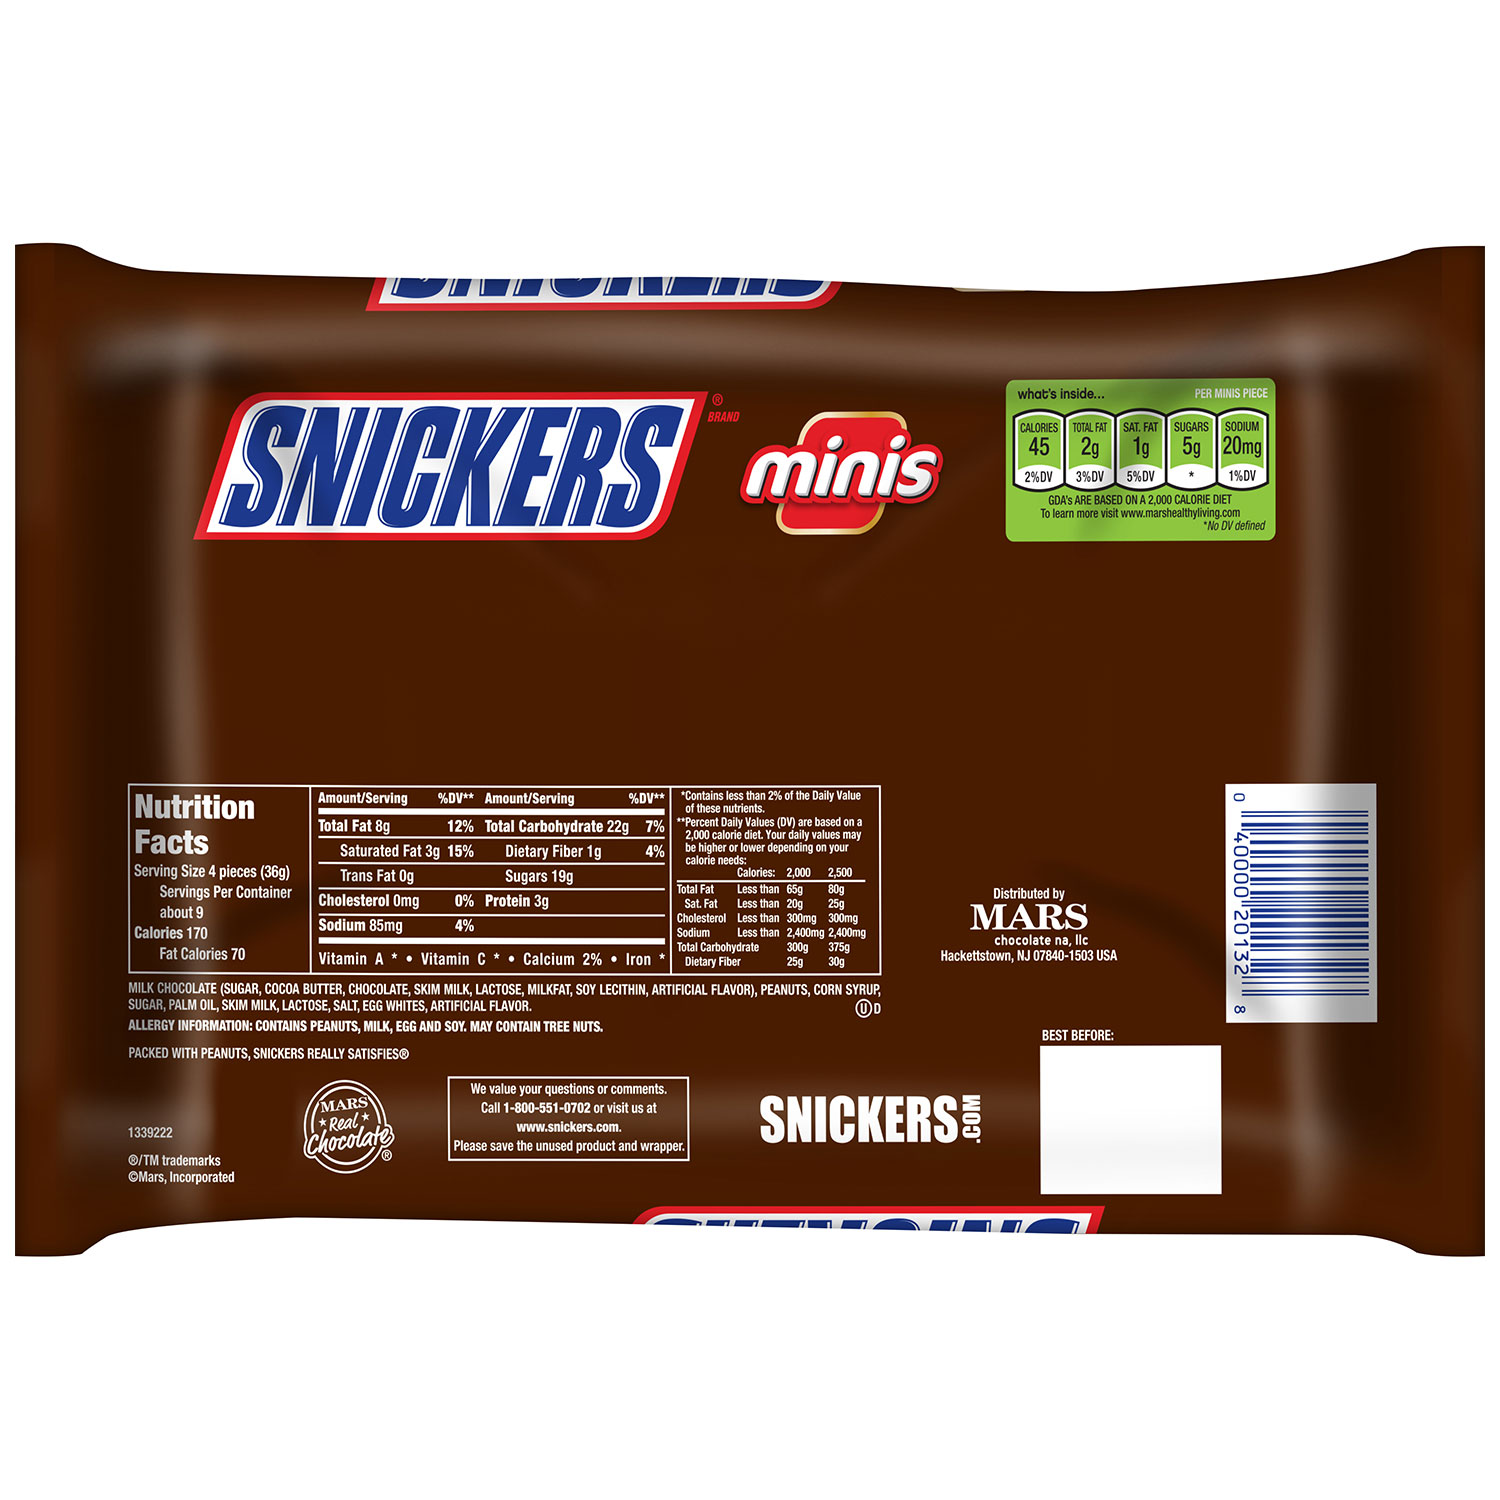 Snickers Original Minis Chocolate Candy Bars, 11.5 Oz. - image 2 of 7